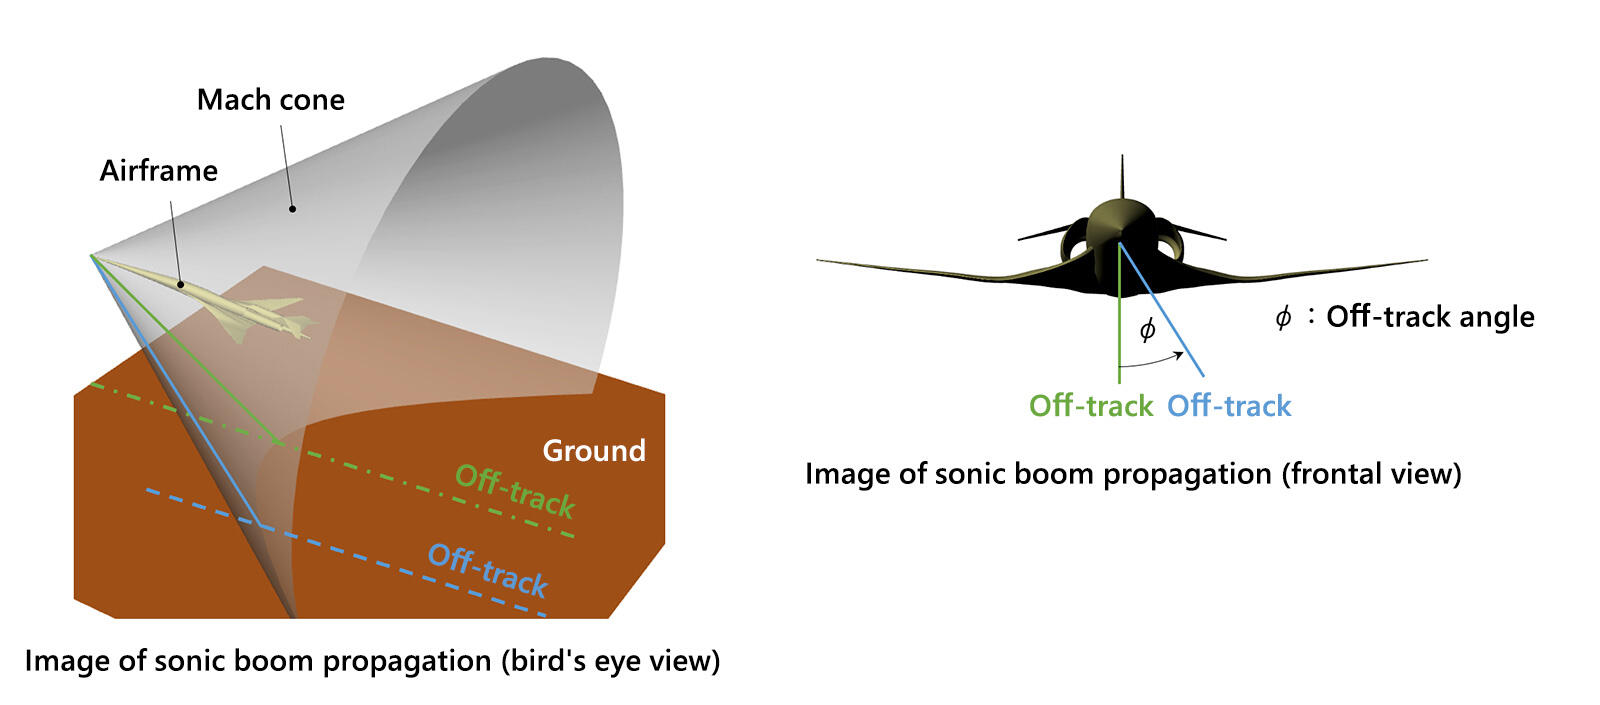 On-track is directly below the aircraft, and off-track is the angle of the sonic boom that spreads out laterally from the aircraft. The sonic boom travels in a conical shape from the nose of the aircraft, and a double thunderclap-like boom can be instantaneously heard.